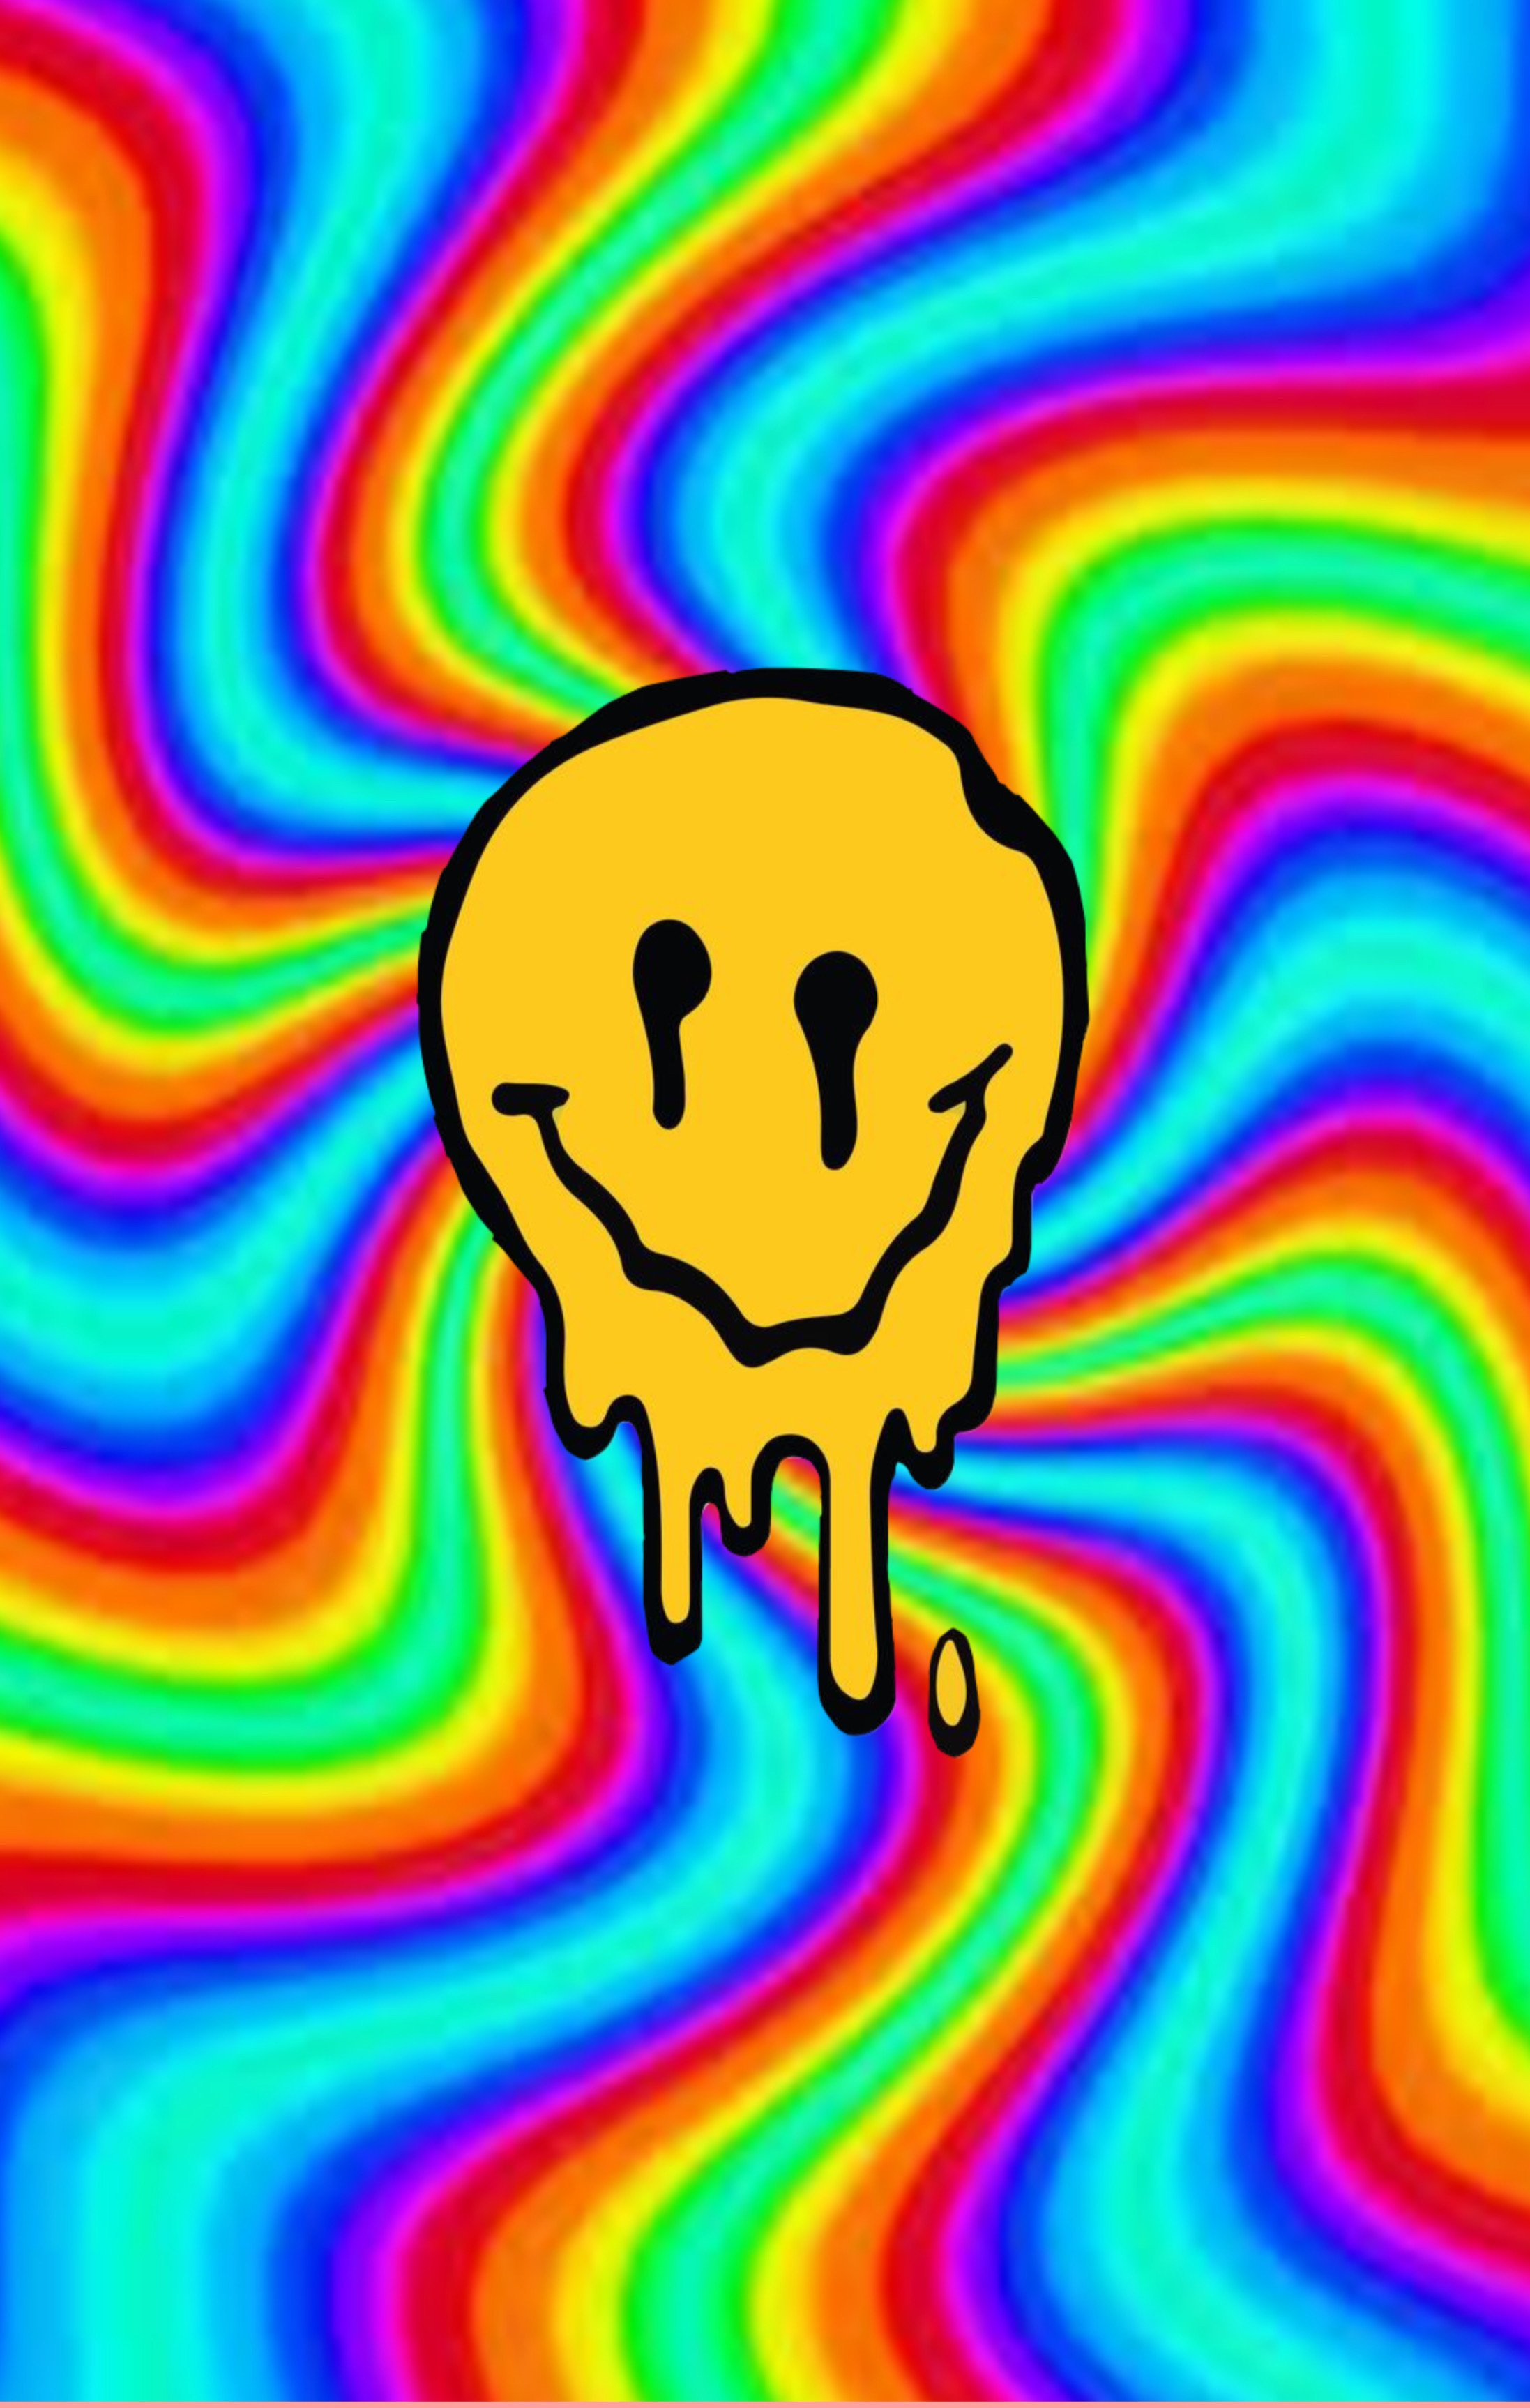 Drippy Smiley Face Wallpapers - Wallpaper Cave